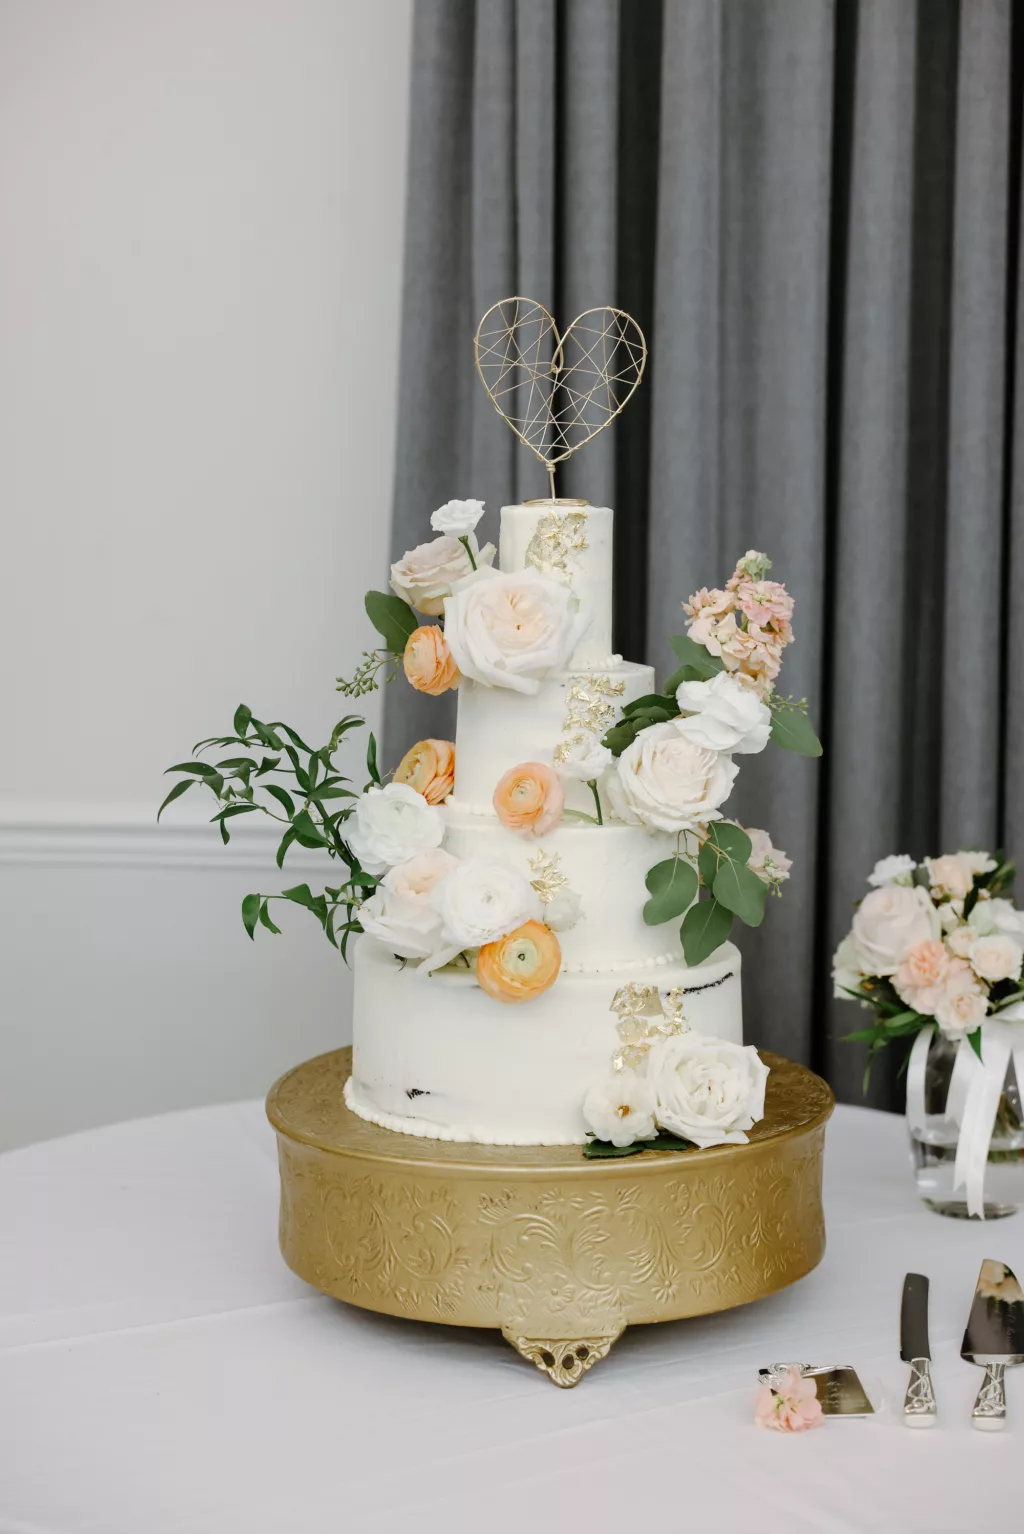 Four-Tiered White Round Buttercream Wedding Cake with Orange Anemone, White Roses, and Greenery Accents